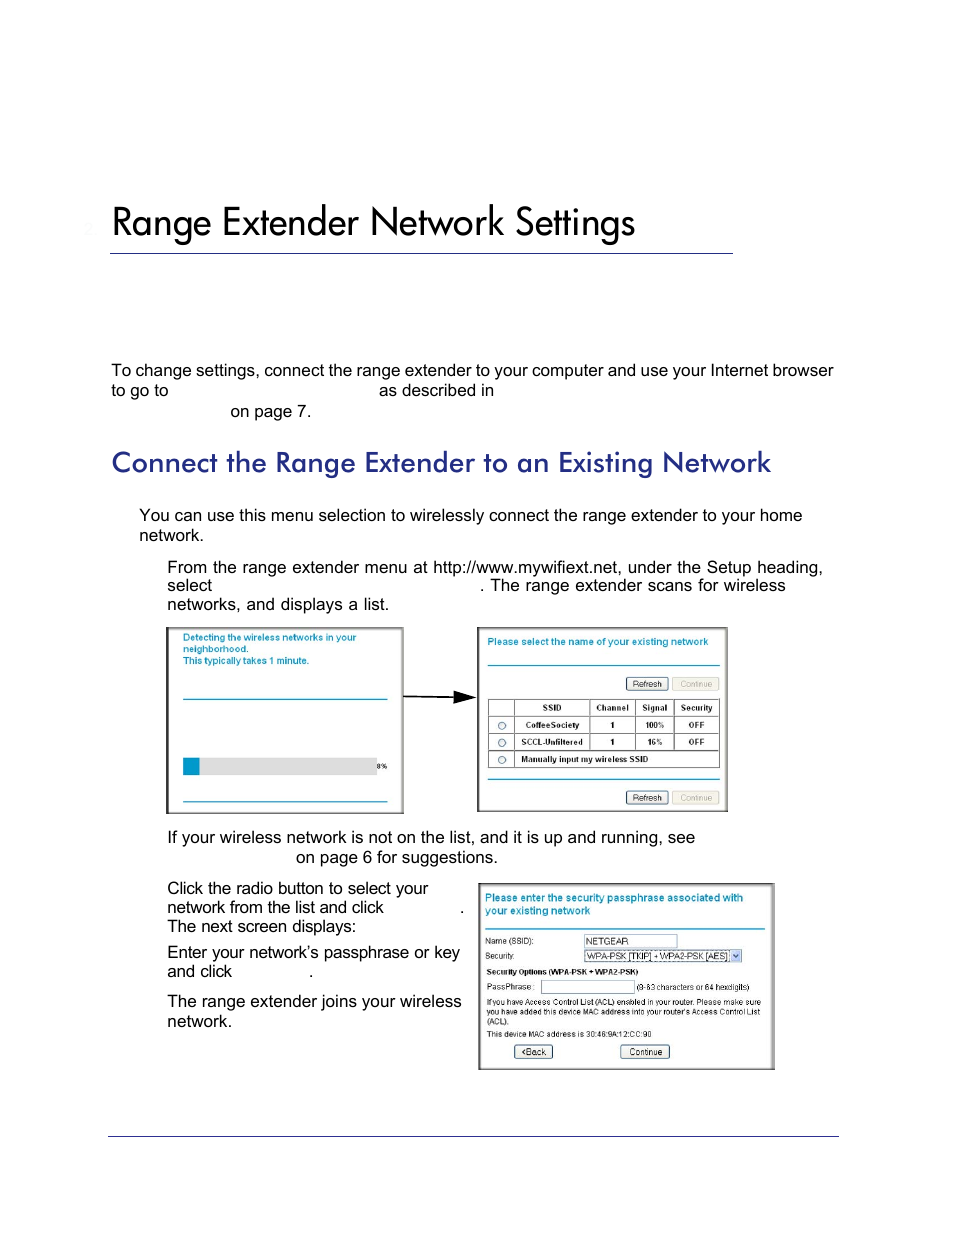 Range extender network settings, Connect the range extender to an existing network, Chapter 2 | Chapter 2, range extender network, Settings | NETGEAR Universal WiFi Range Extender WN2000RPT User Manual | Page 11 / 31